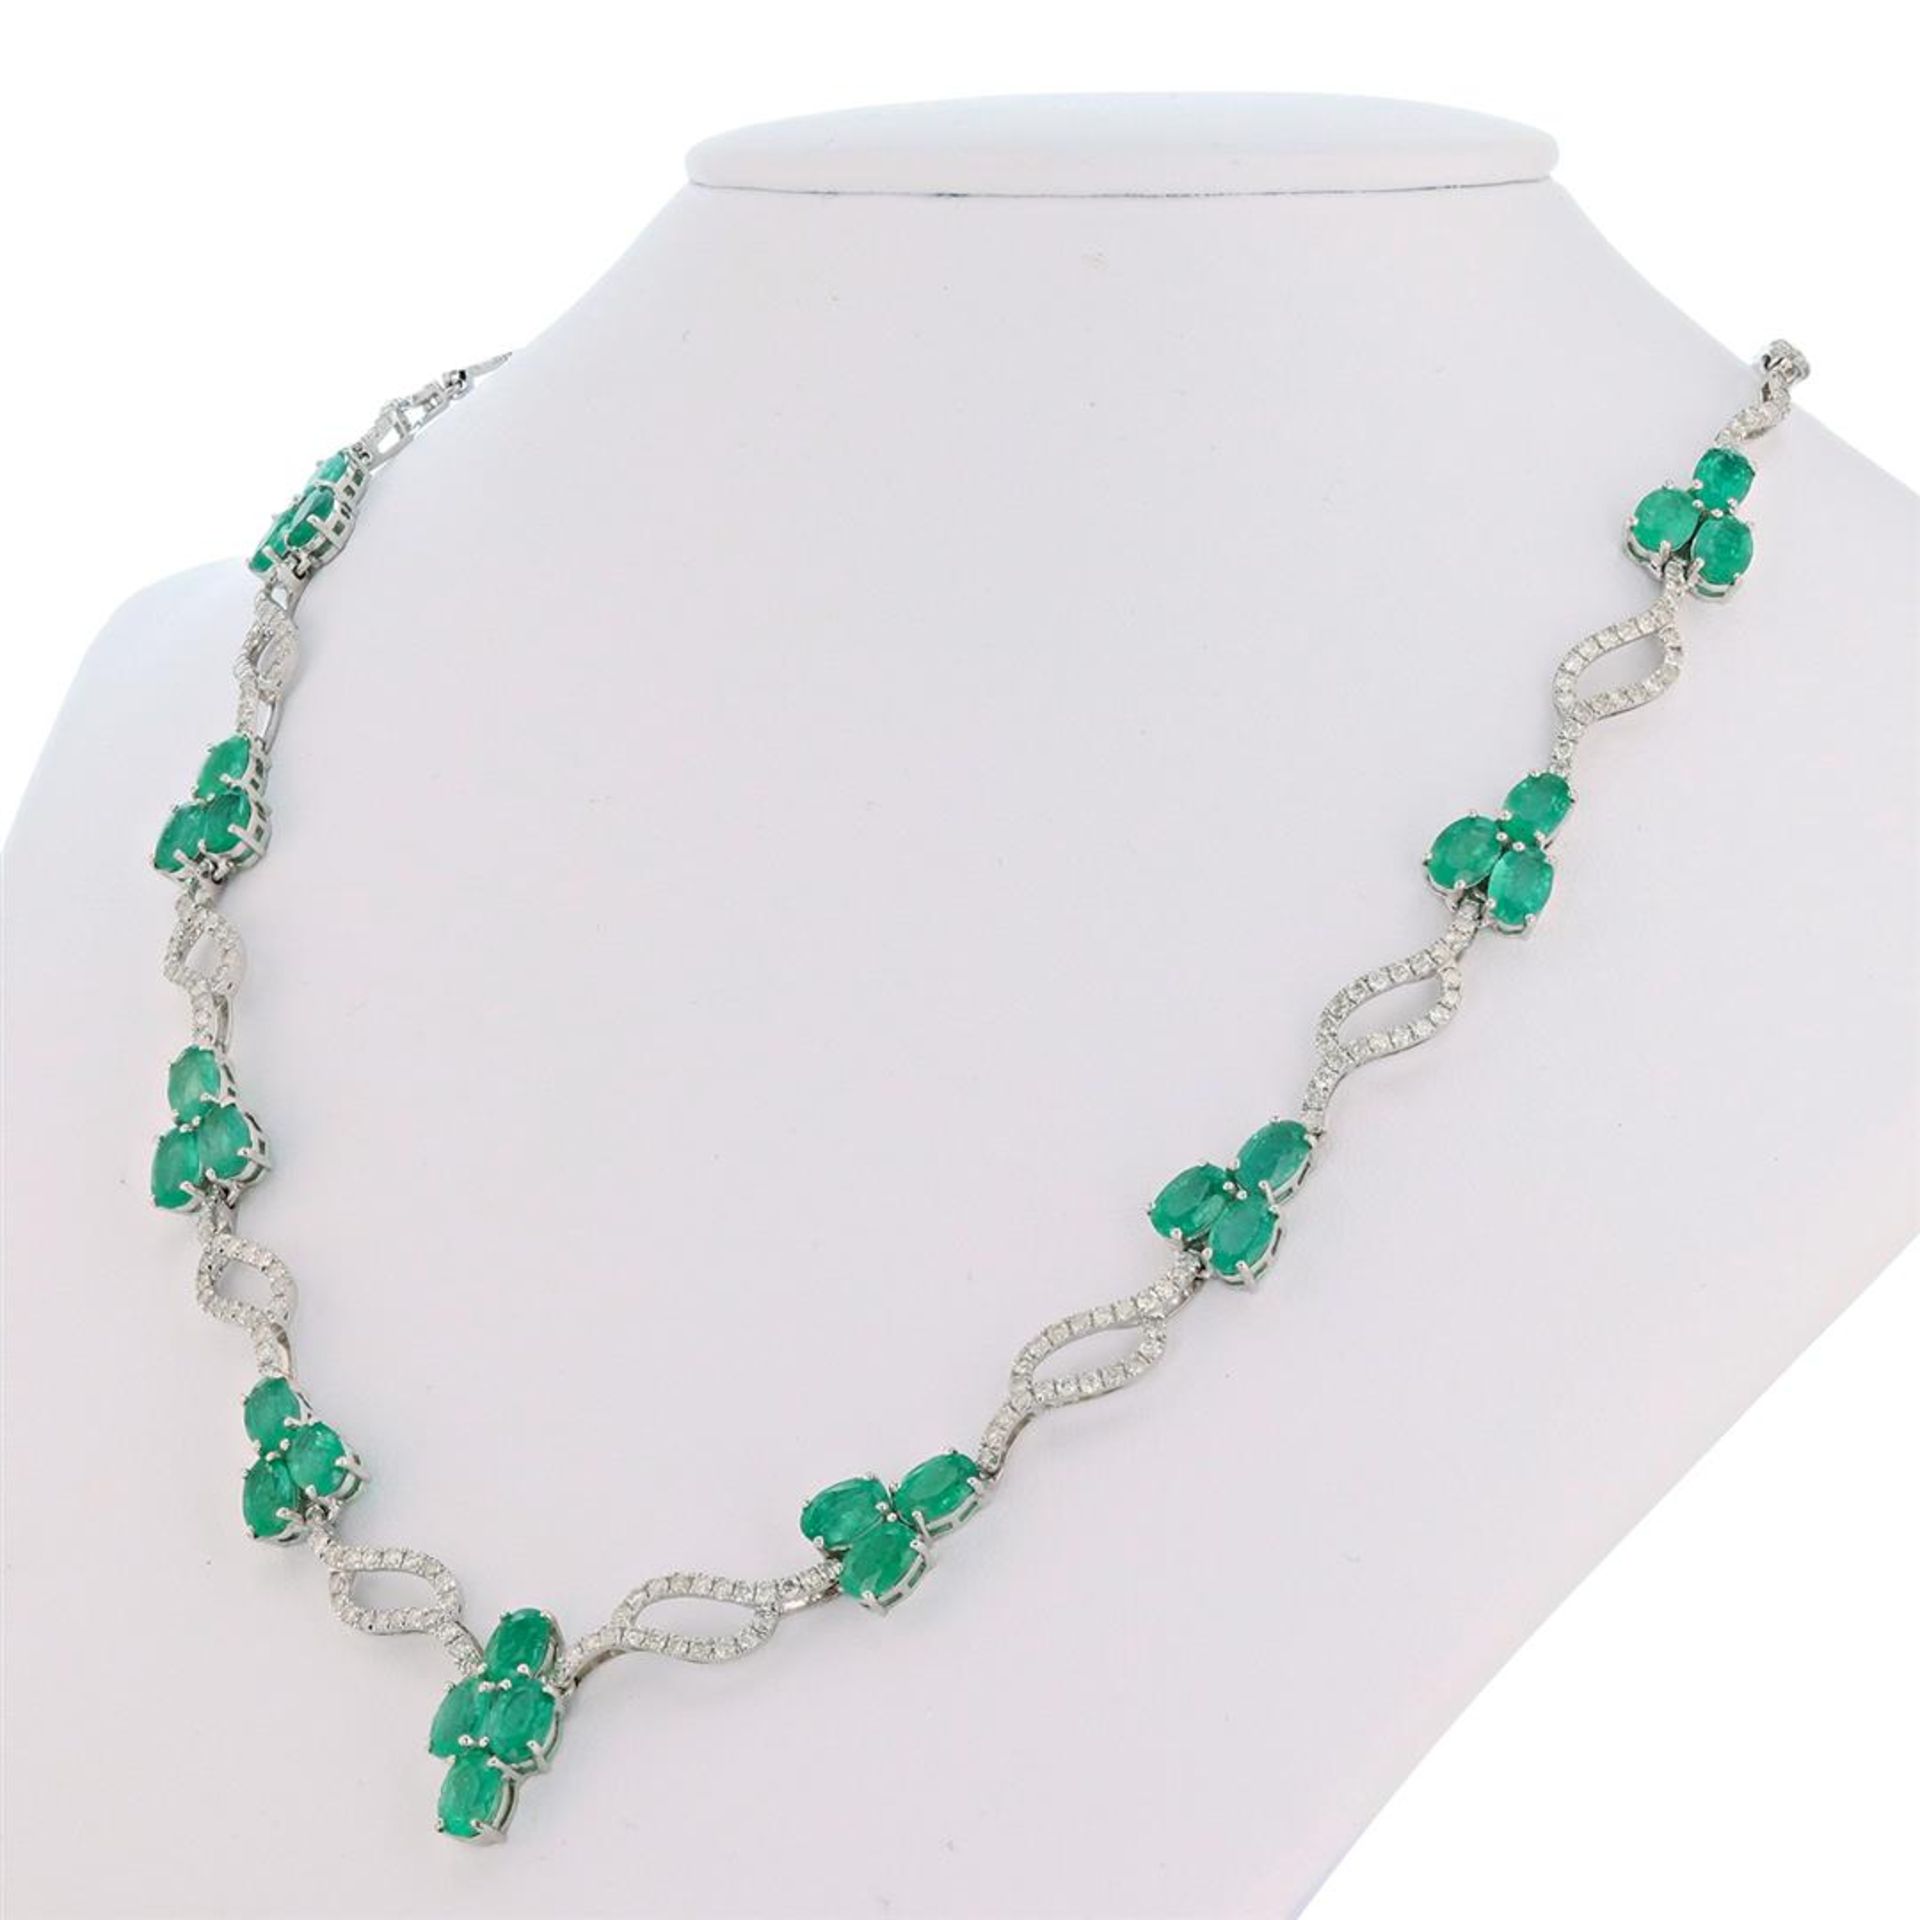 11.92ctw Emerald and 3.64ctw Diamond 18K White Gold Necklace - Image 2 of 4